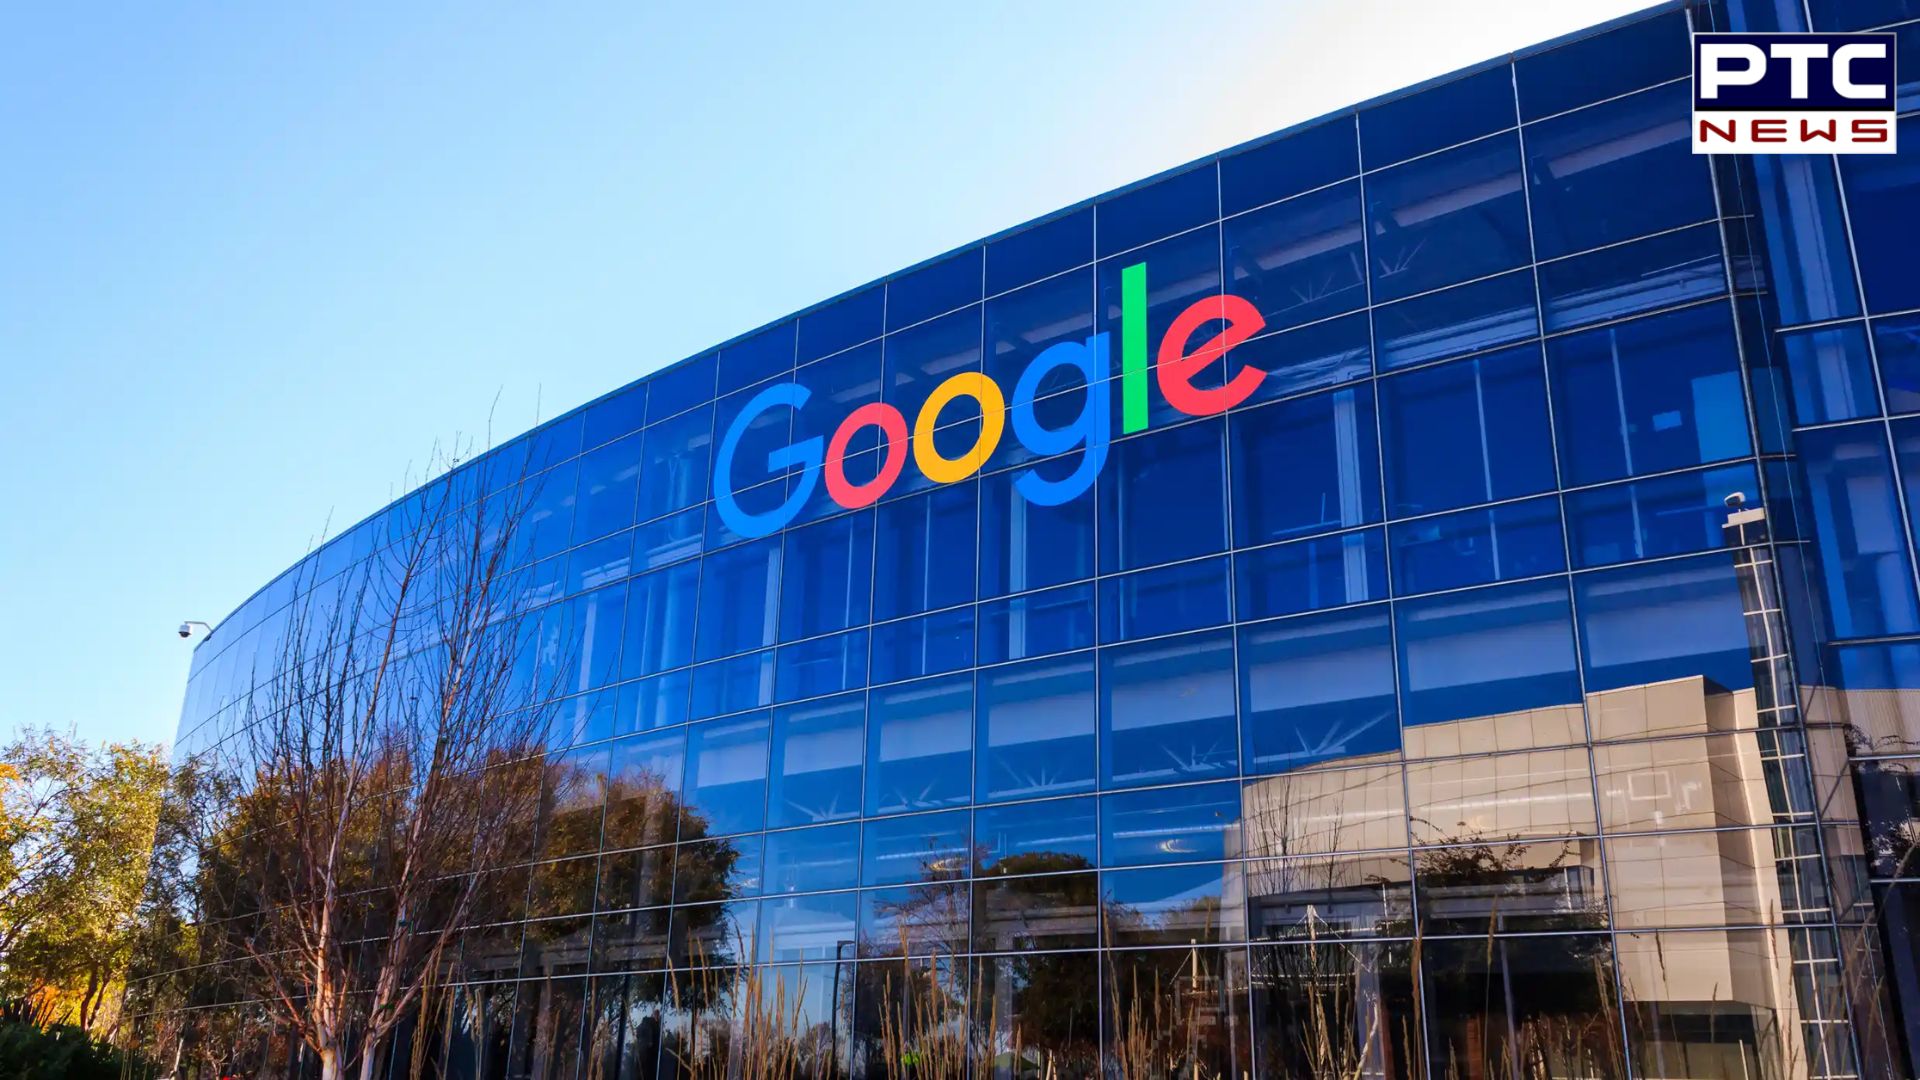 Google agrees to erase incognito mode search data in response to $5 bn privacy lawsuit